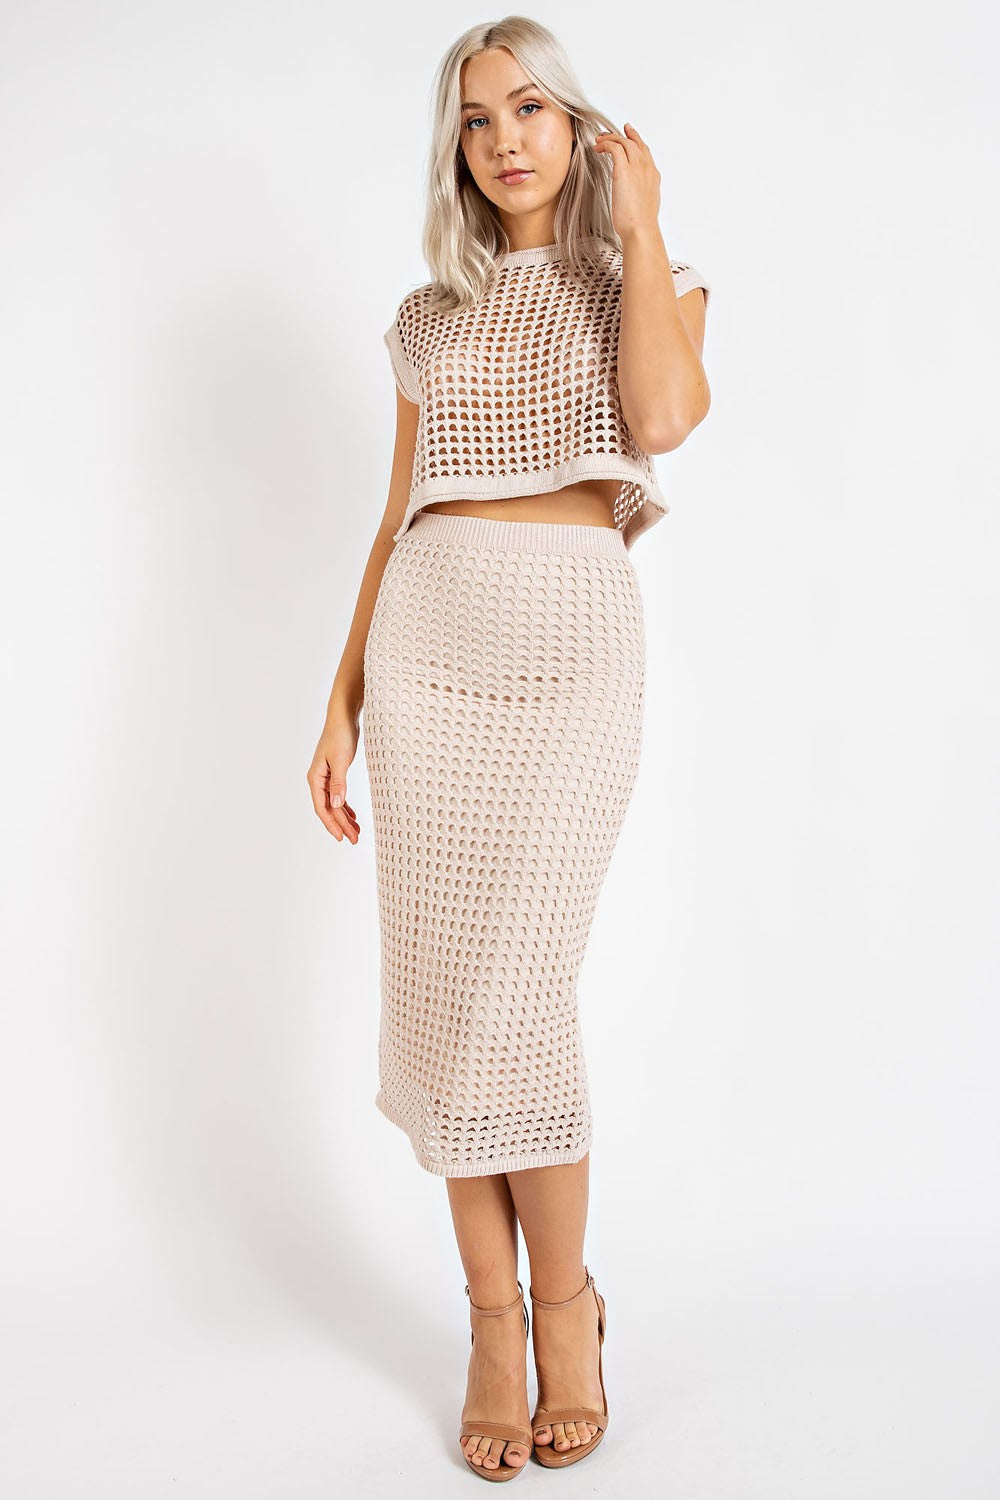 Woven Way Crochet Set Skirt and Crop Top in Natural